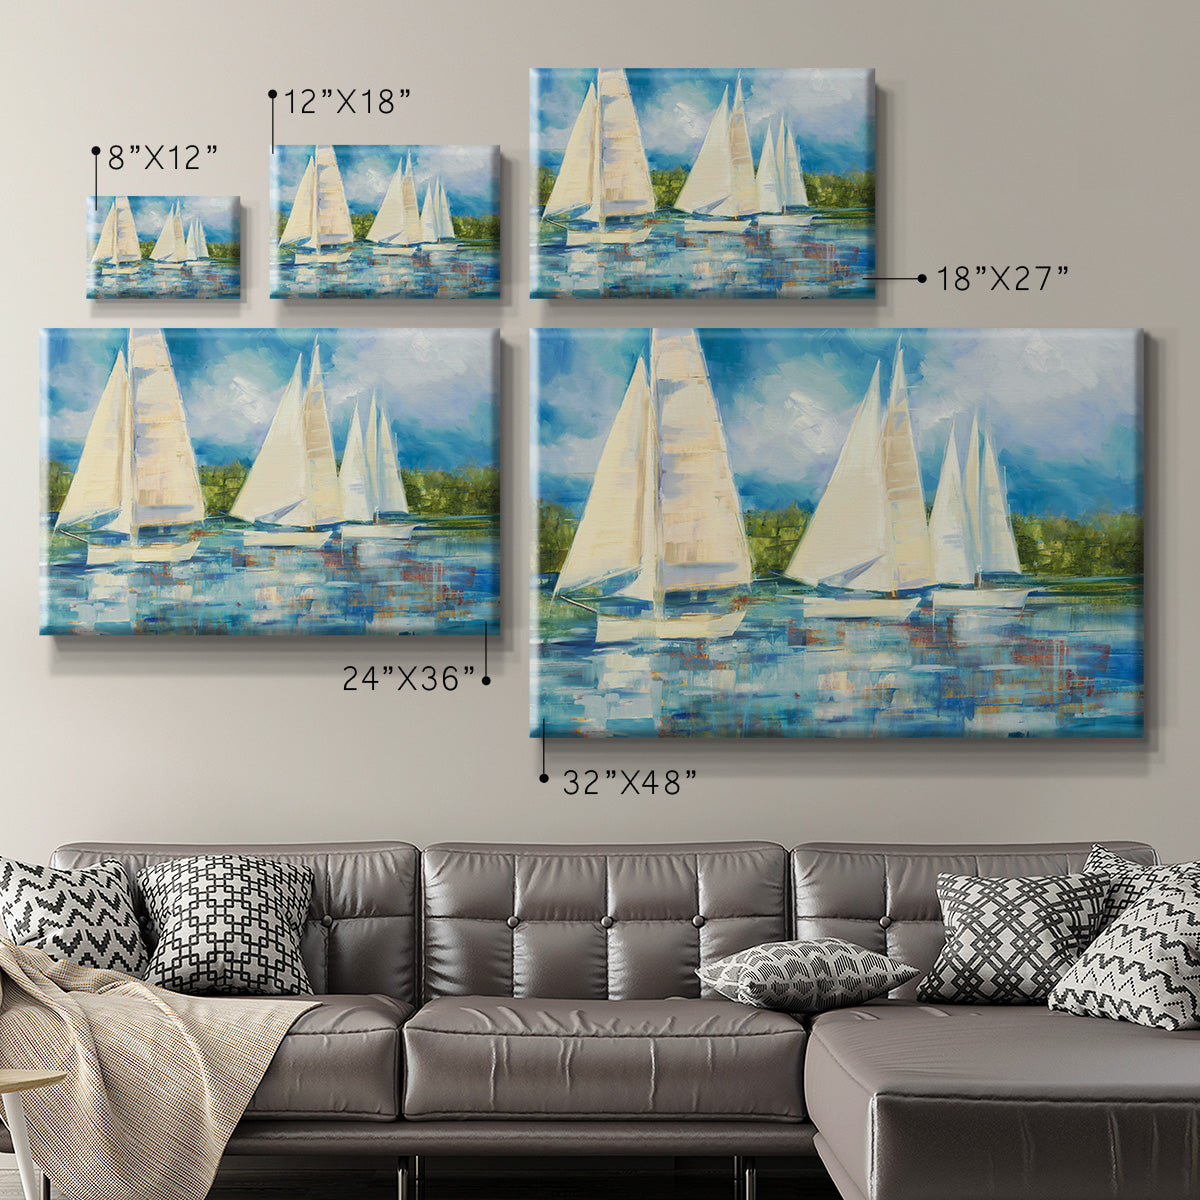 Clear Sailing Premium Gallery Wrapped Canvas - Ready to Hang